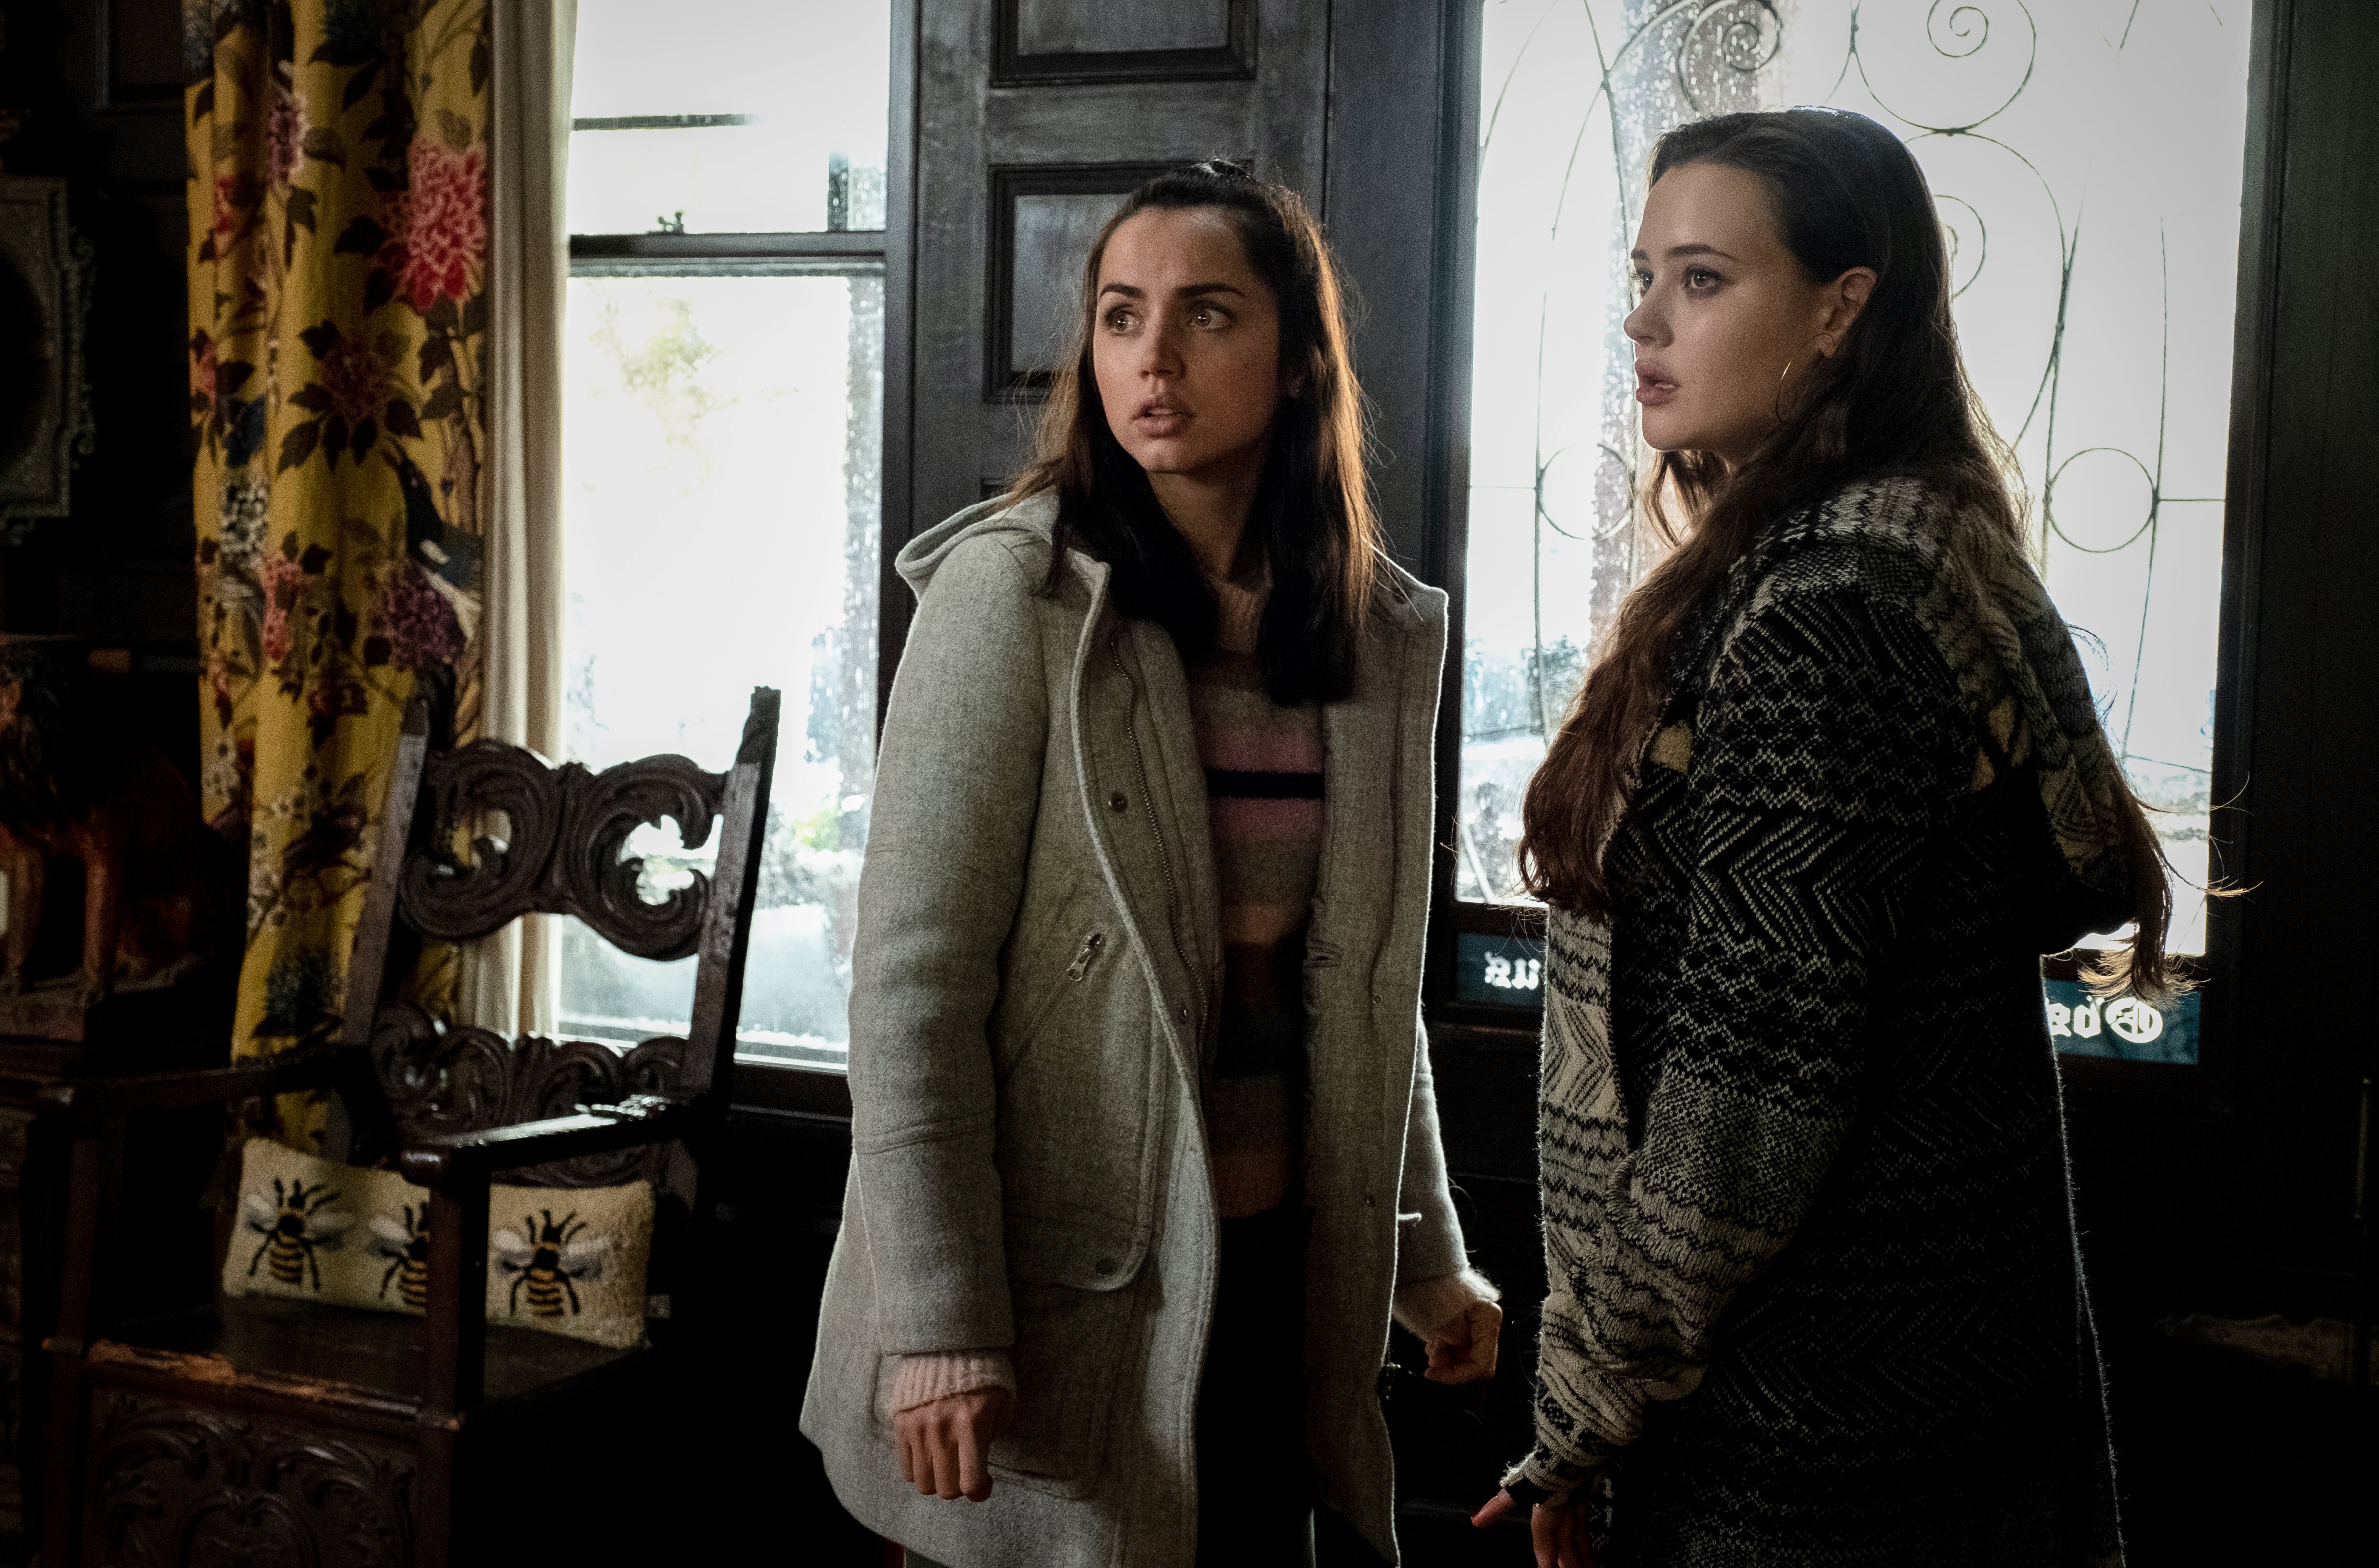 Ana de Armas, left, with Katherine Langford in "Knives Out."